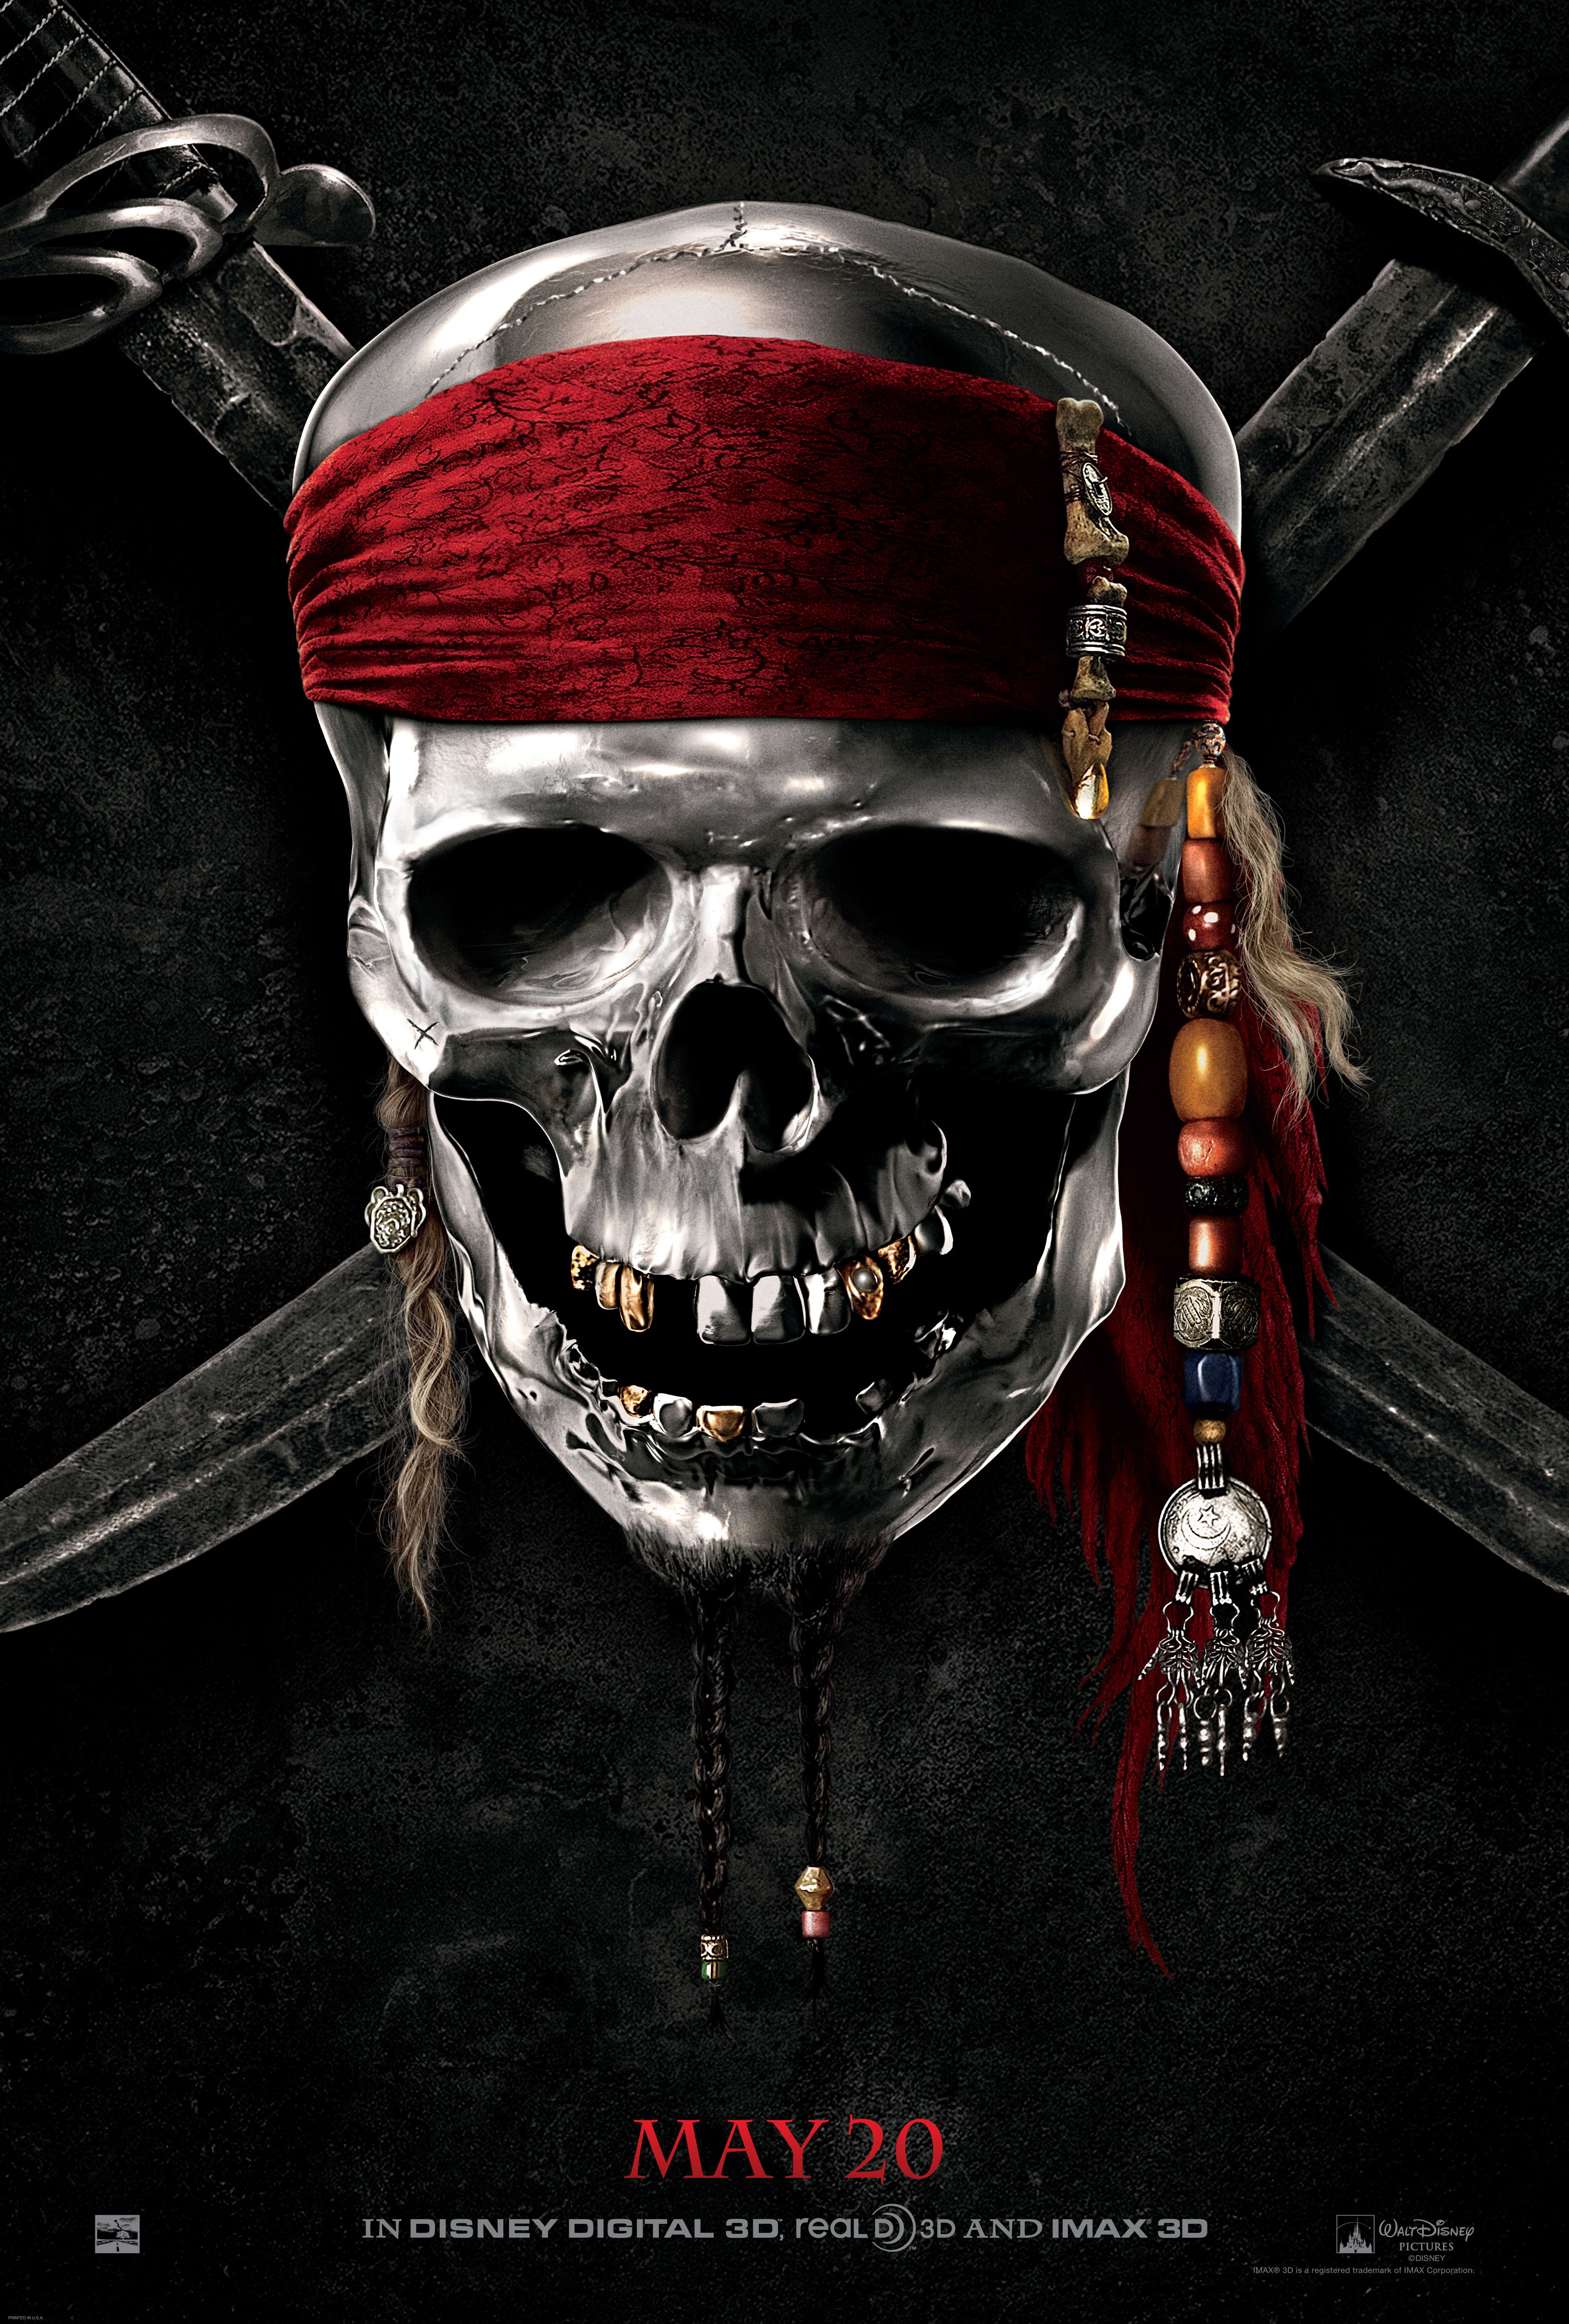 Pirates of the Caribbean 4 Poster